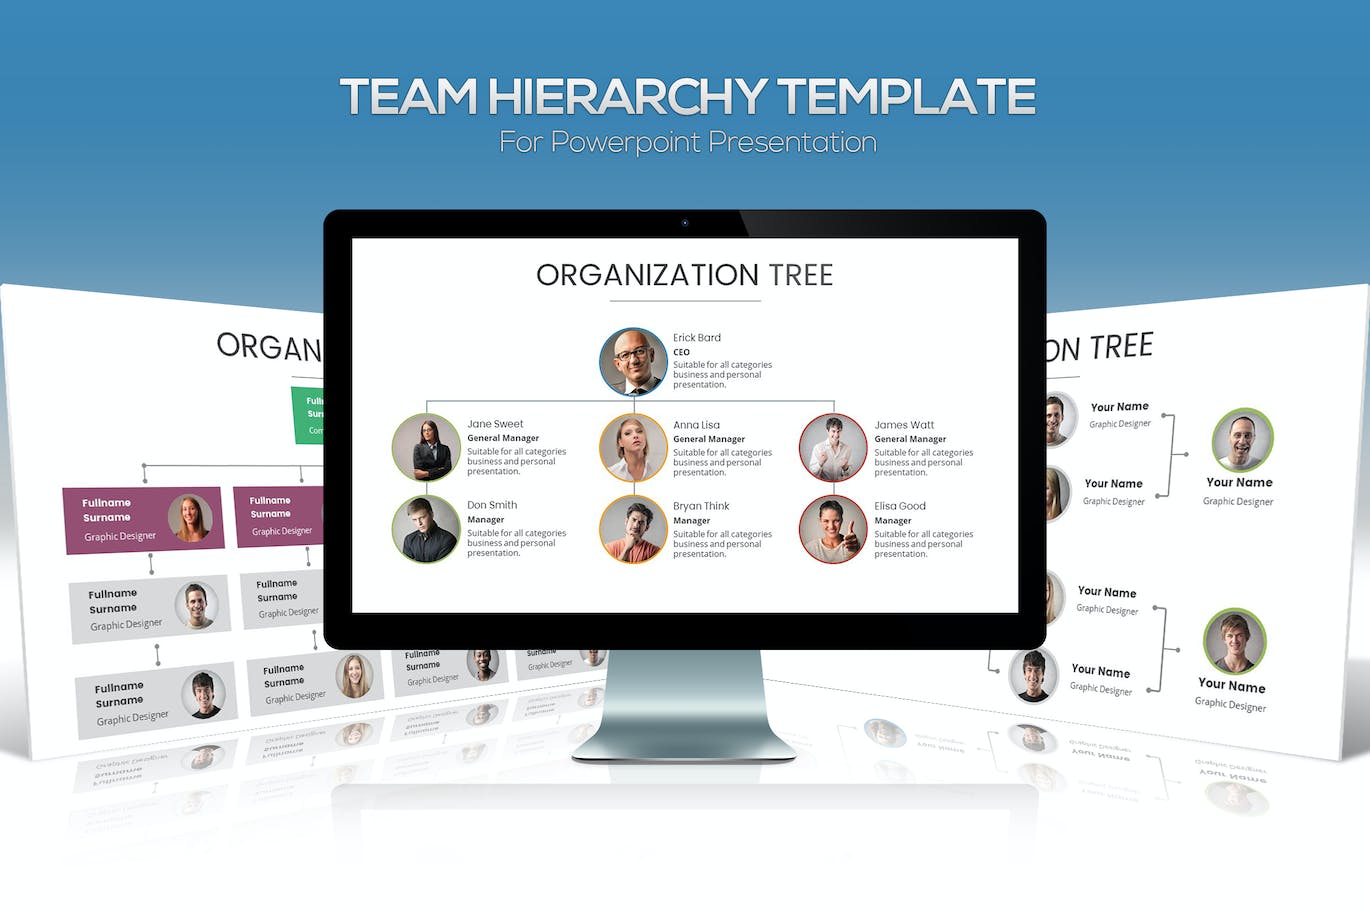 A pack of images of great presentation template slides on the topic of hierarchy in a team.